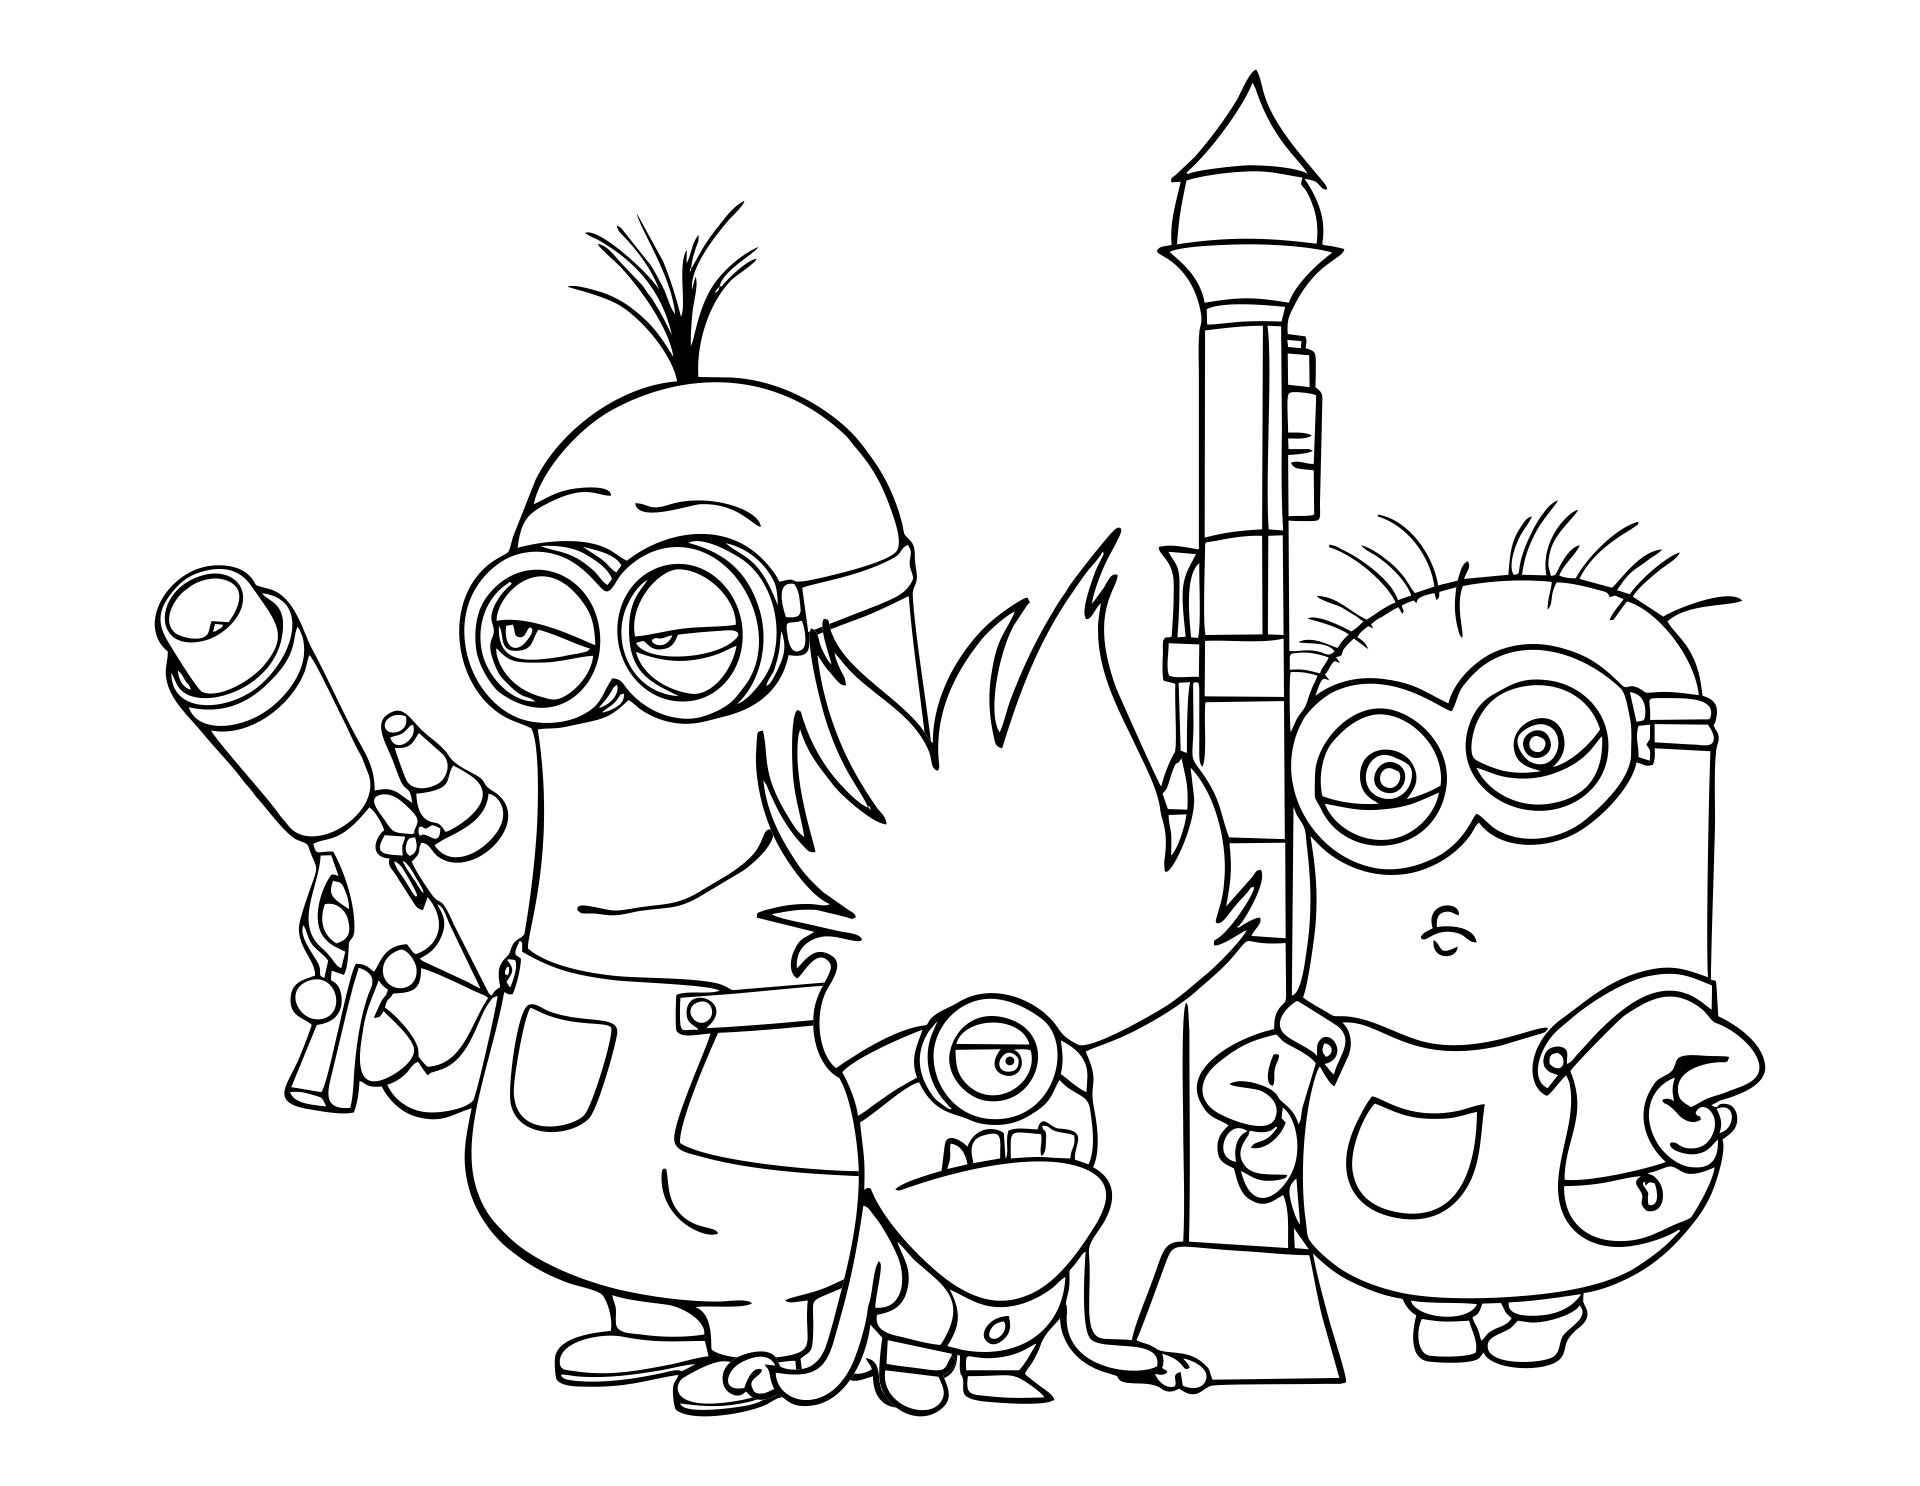 Easter Coloring Pages Minions - 10 Free PDF Printables | Printablee